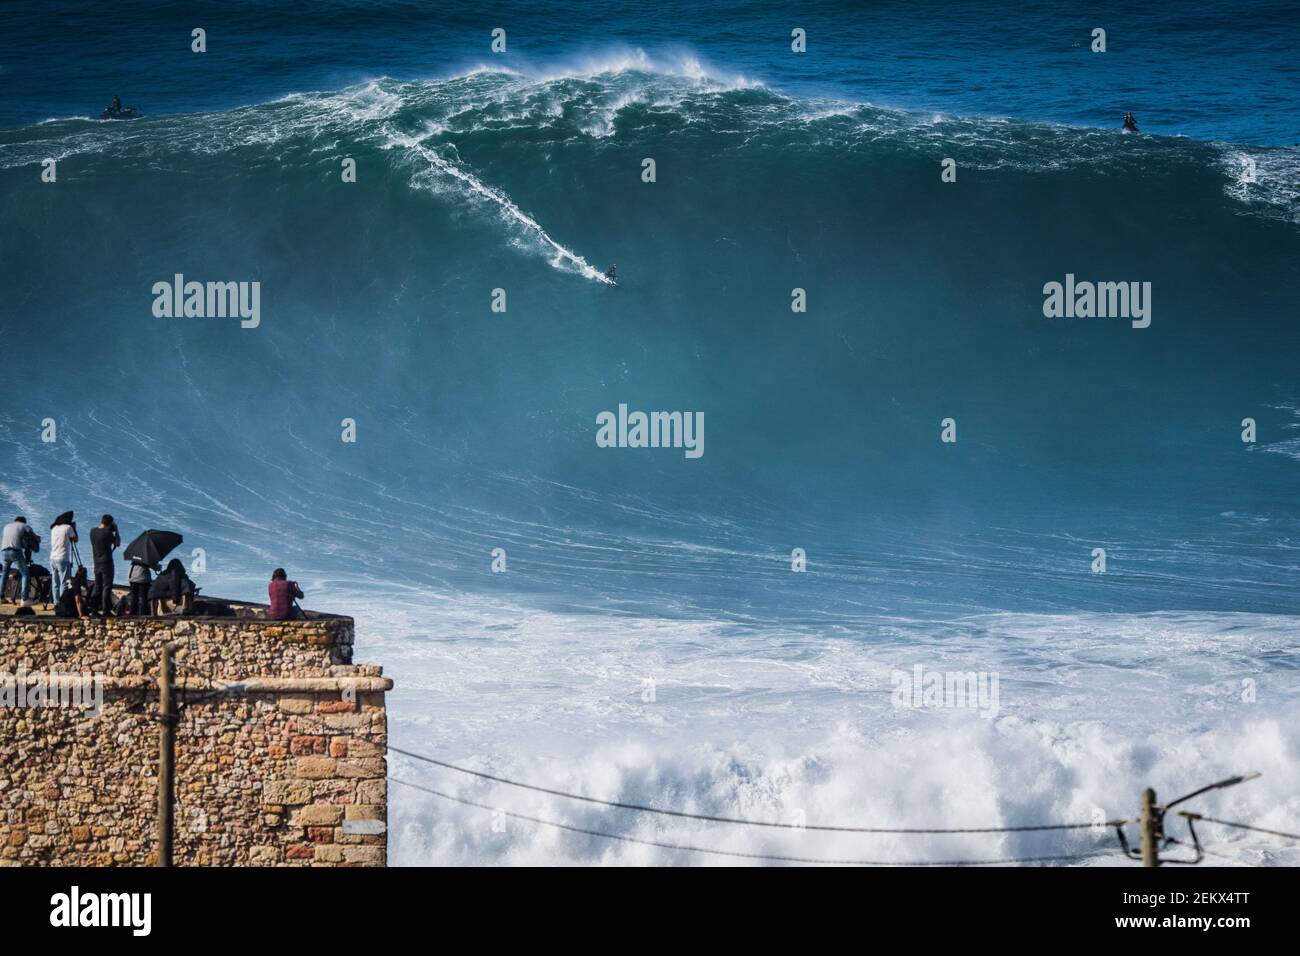 Big wave surfer Sebastian Steudtner from Germany rides a wave during a tow  surfing session at Praia do Norte on the first big swell of winter season.  (Photo by Henrique Casinhas /